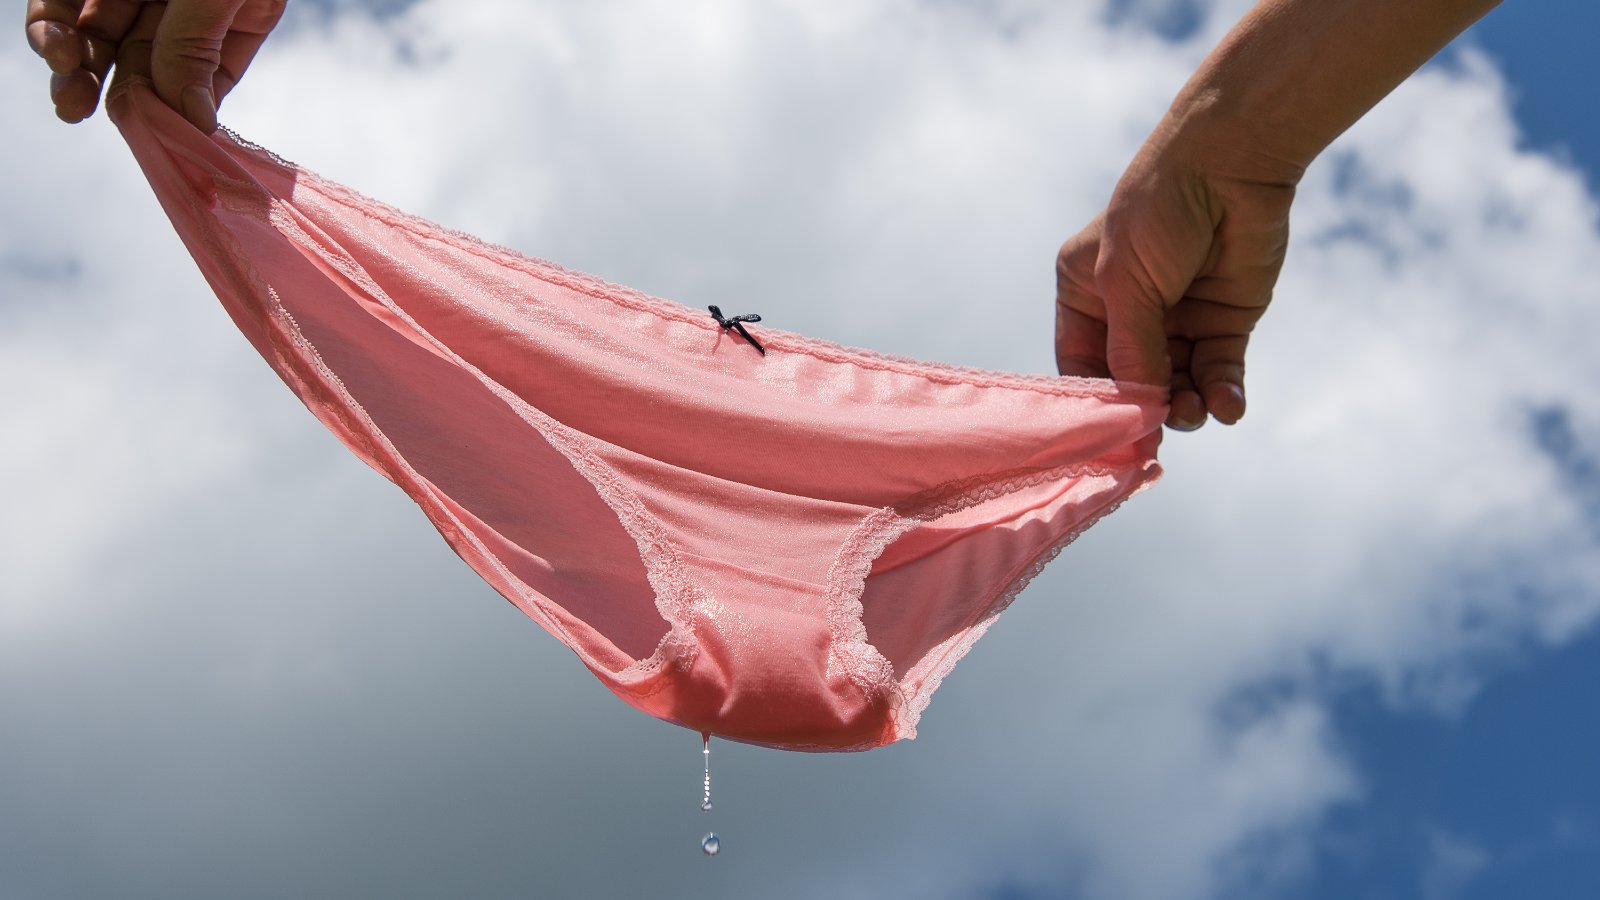 alan thien recommends girls peeing in thier panties pic